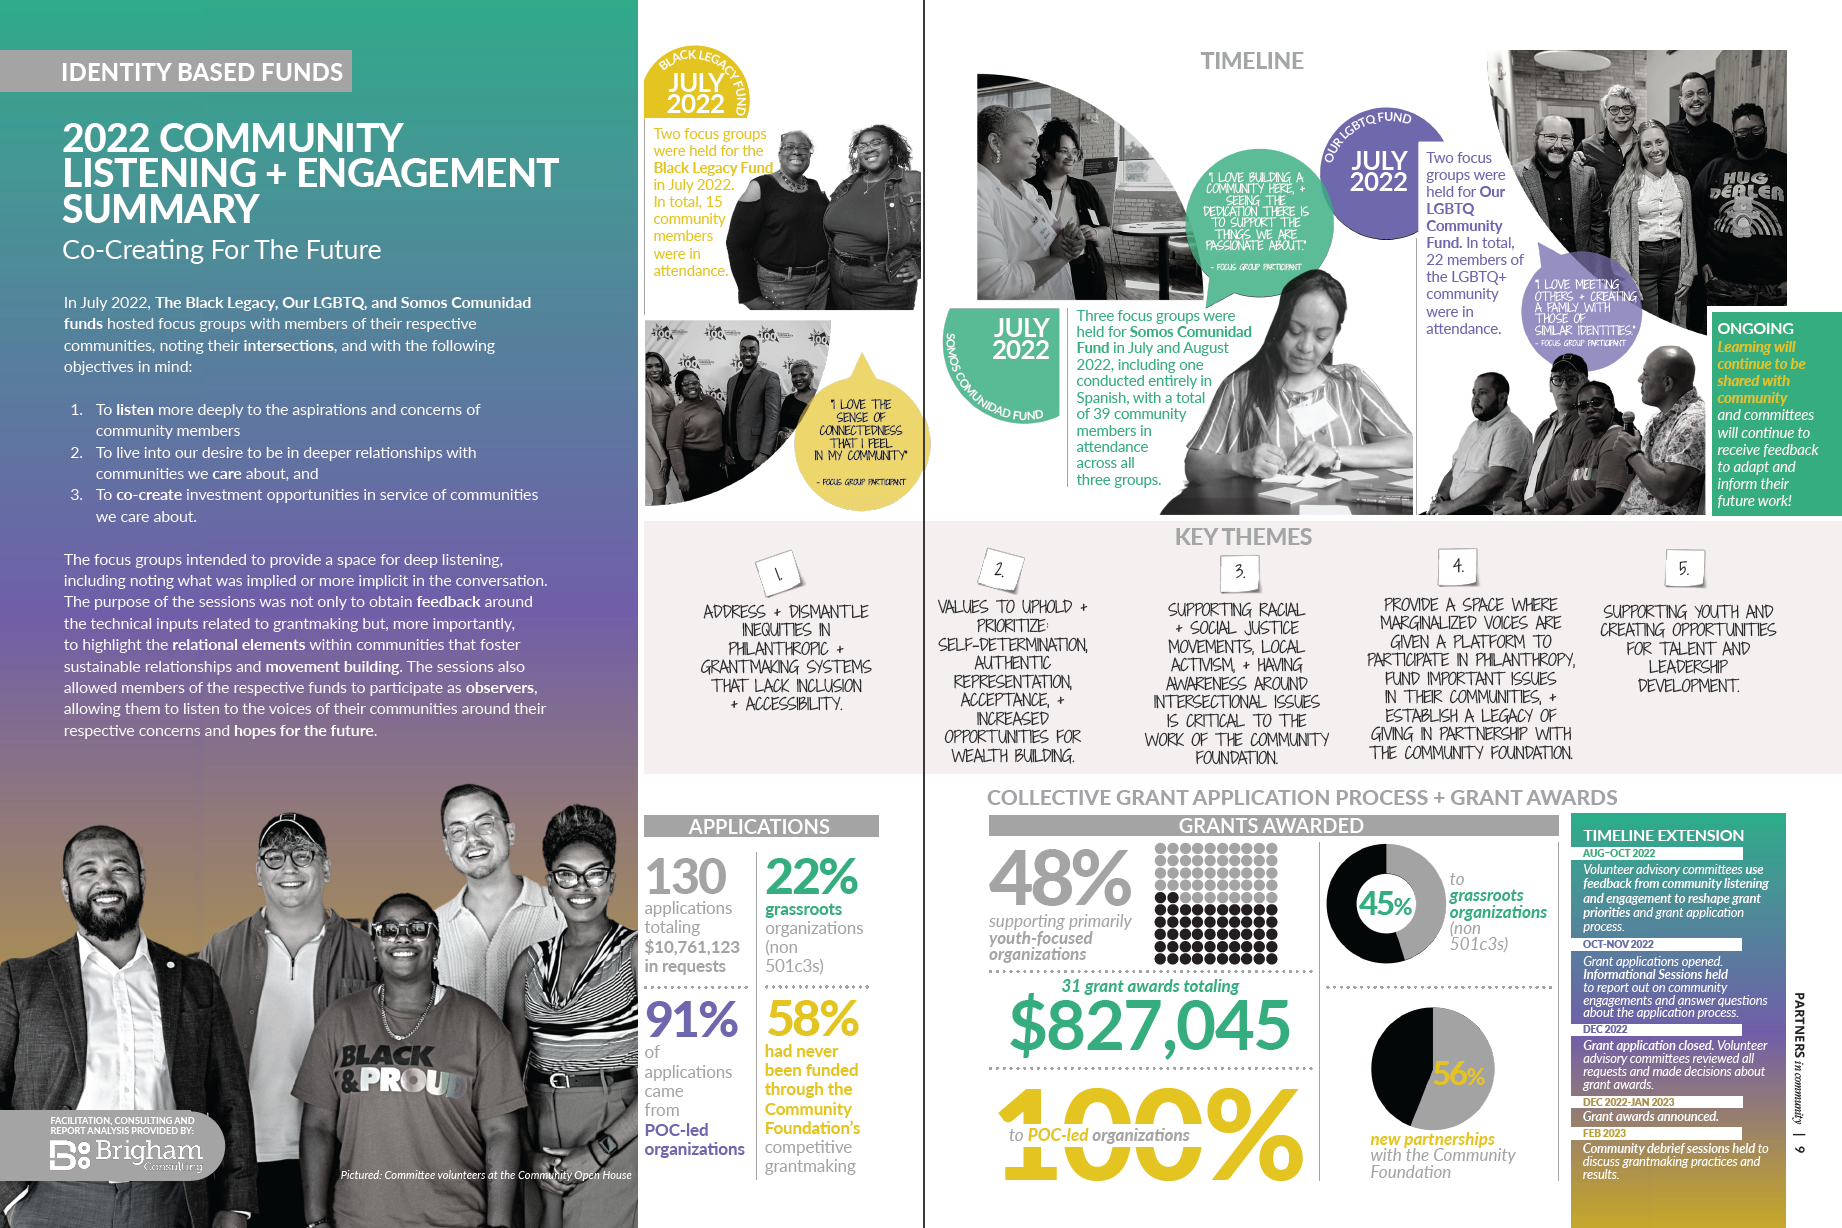 Preview of an article that has a timeline of the 2022 Community Listening and Engagement Summary. The preview also shows key themes and an infographic of information about the applications and grants awarded.